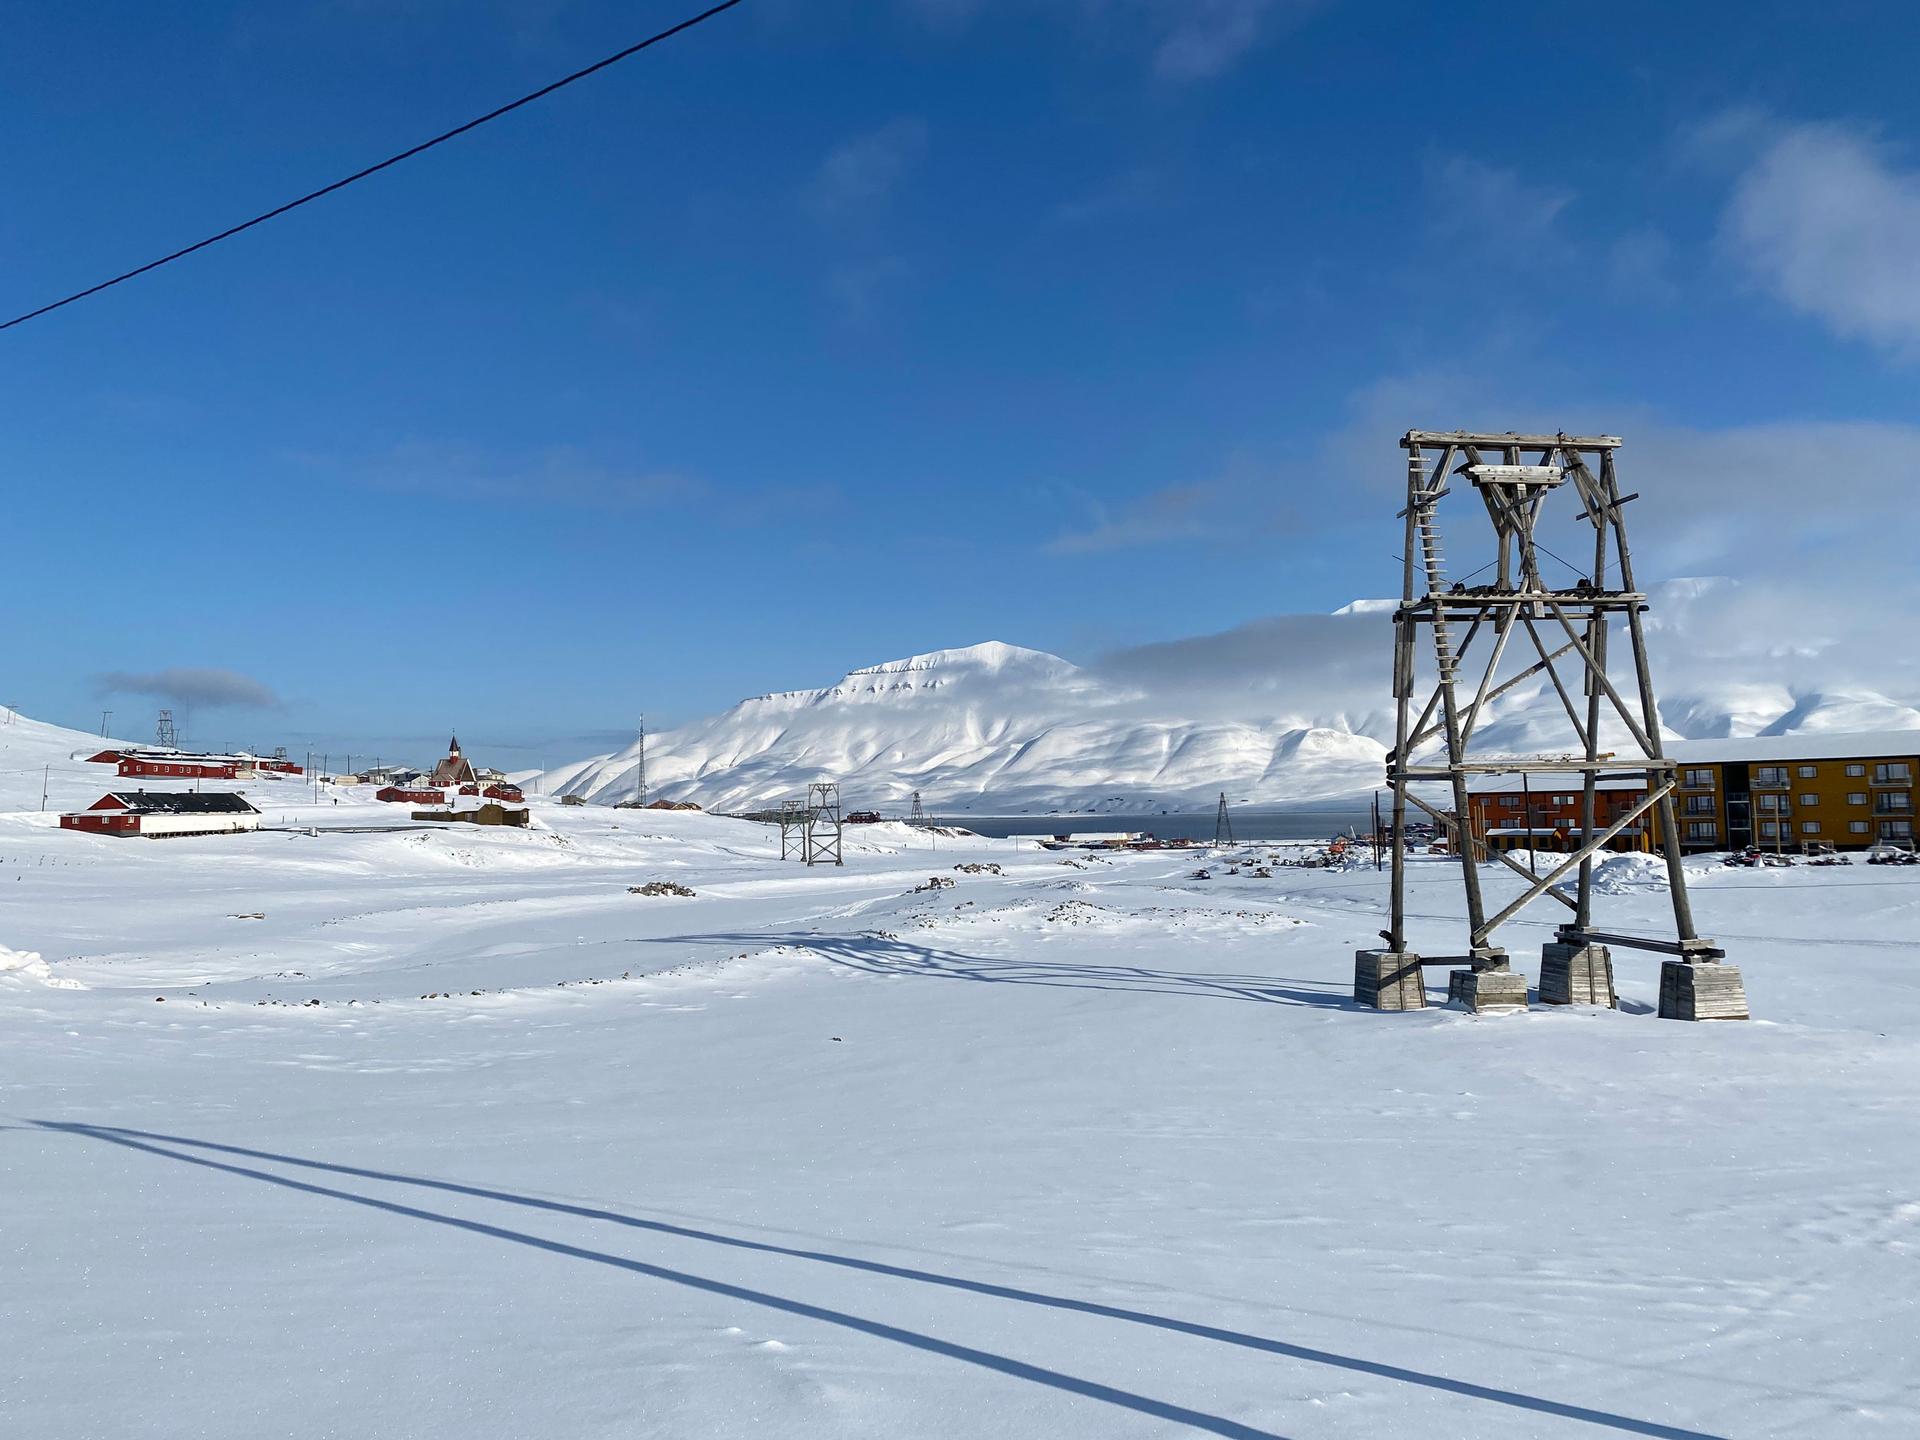 Longyearbyen originated as a coal mining town, and while many of the mines are now relics, the last active one isn’t expected to close until 2023.